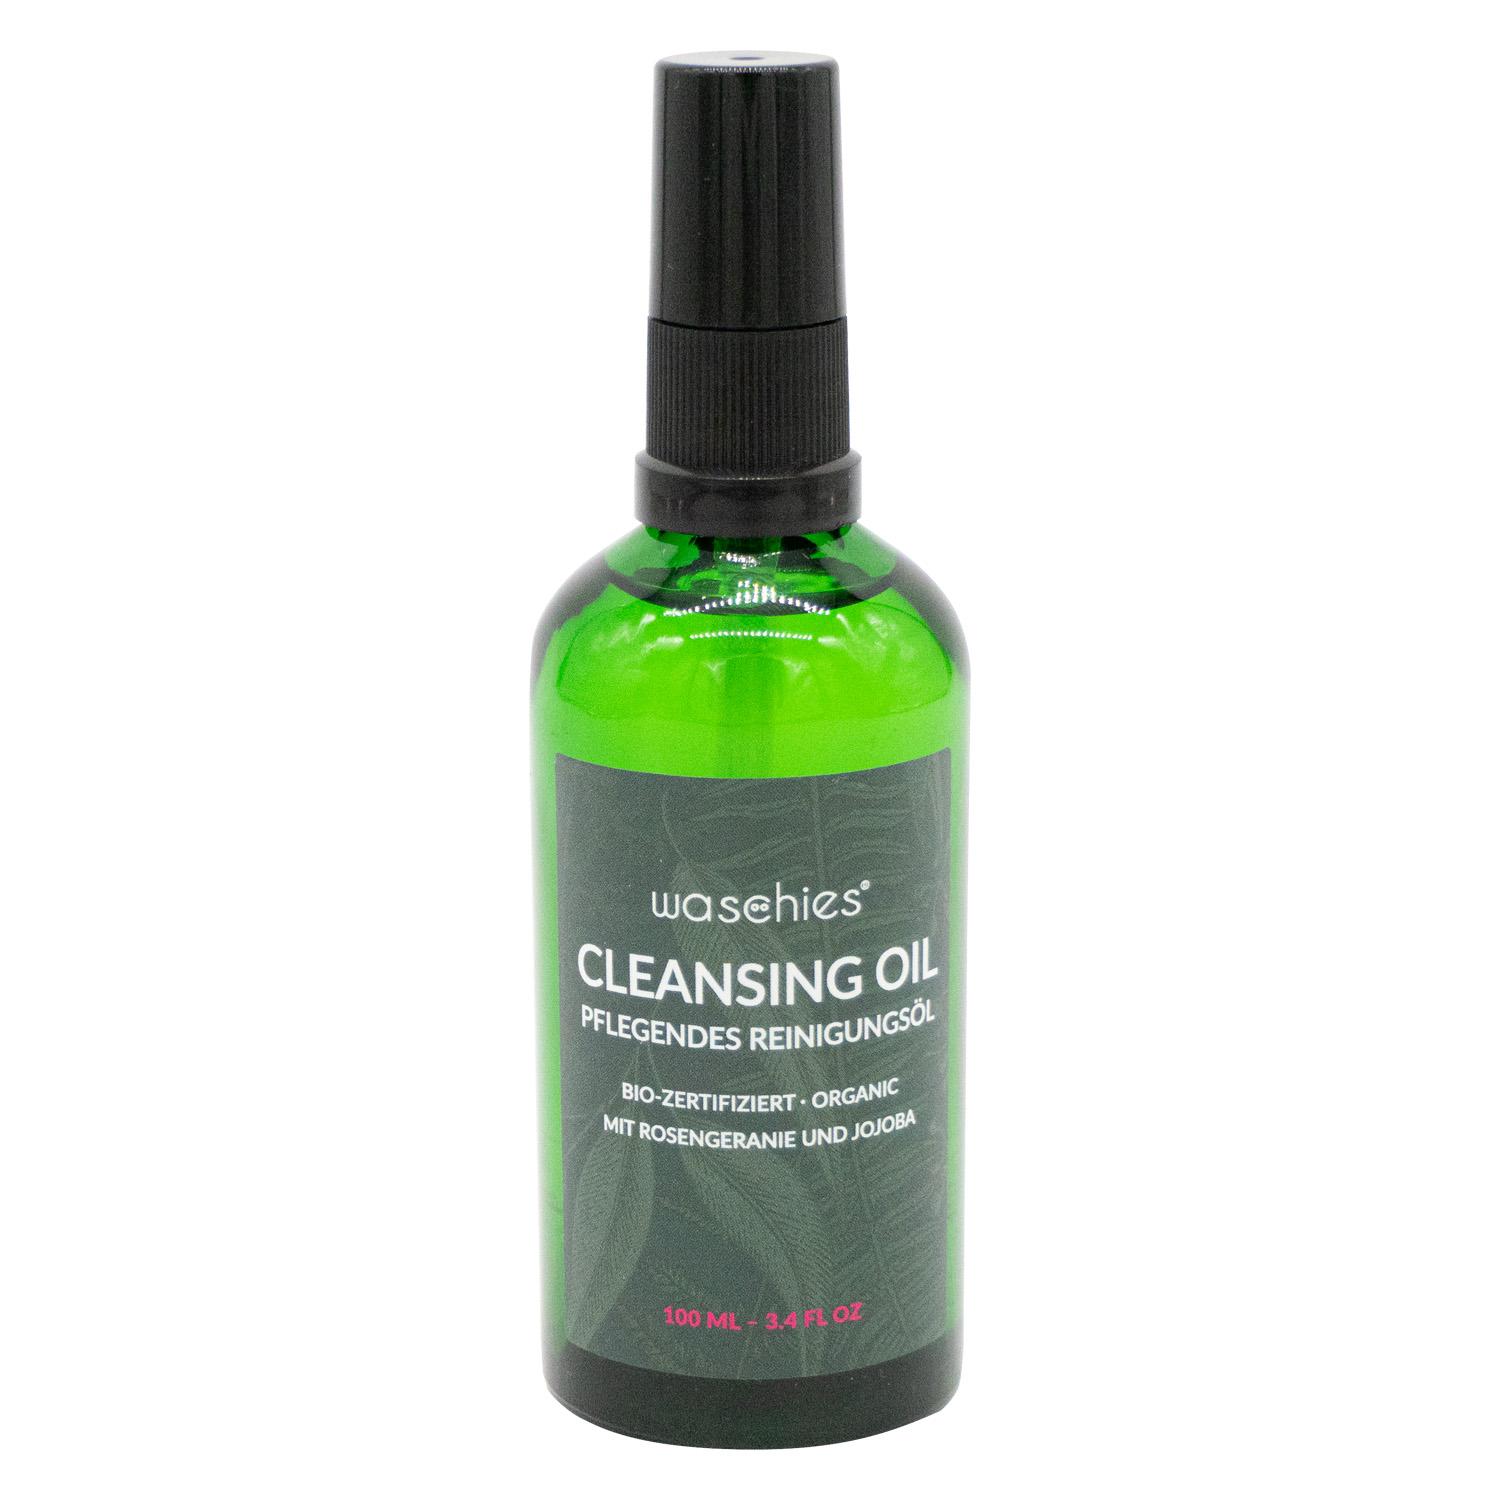 Waschies Faceline - Cleansing Oil